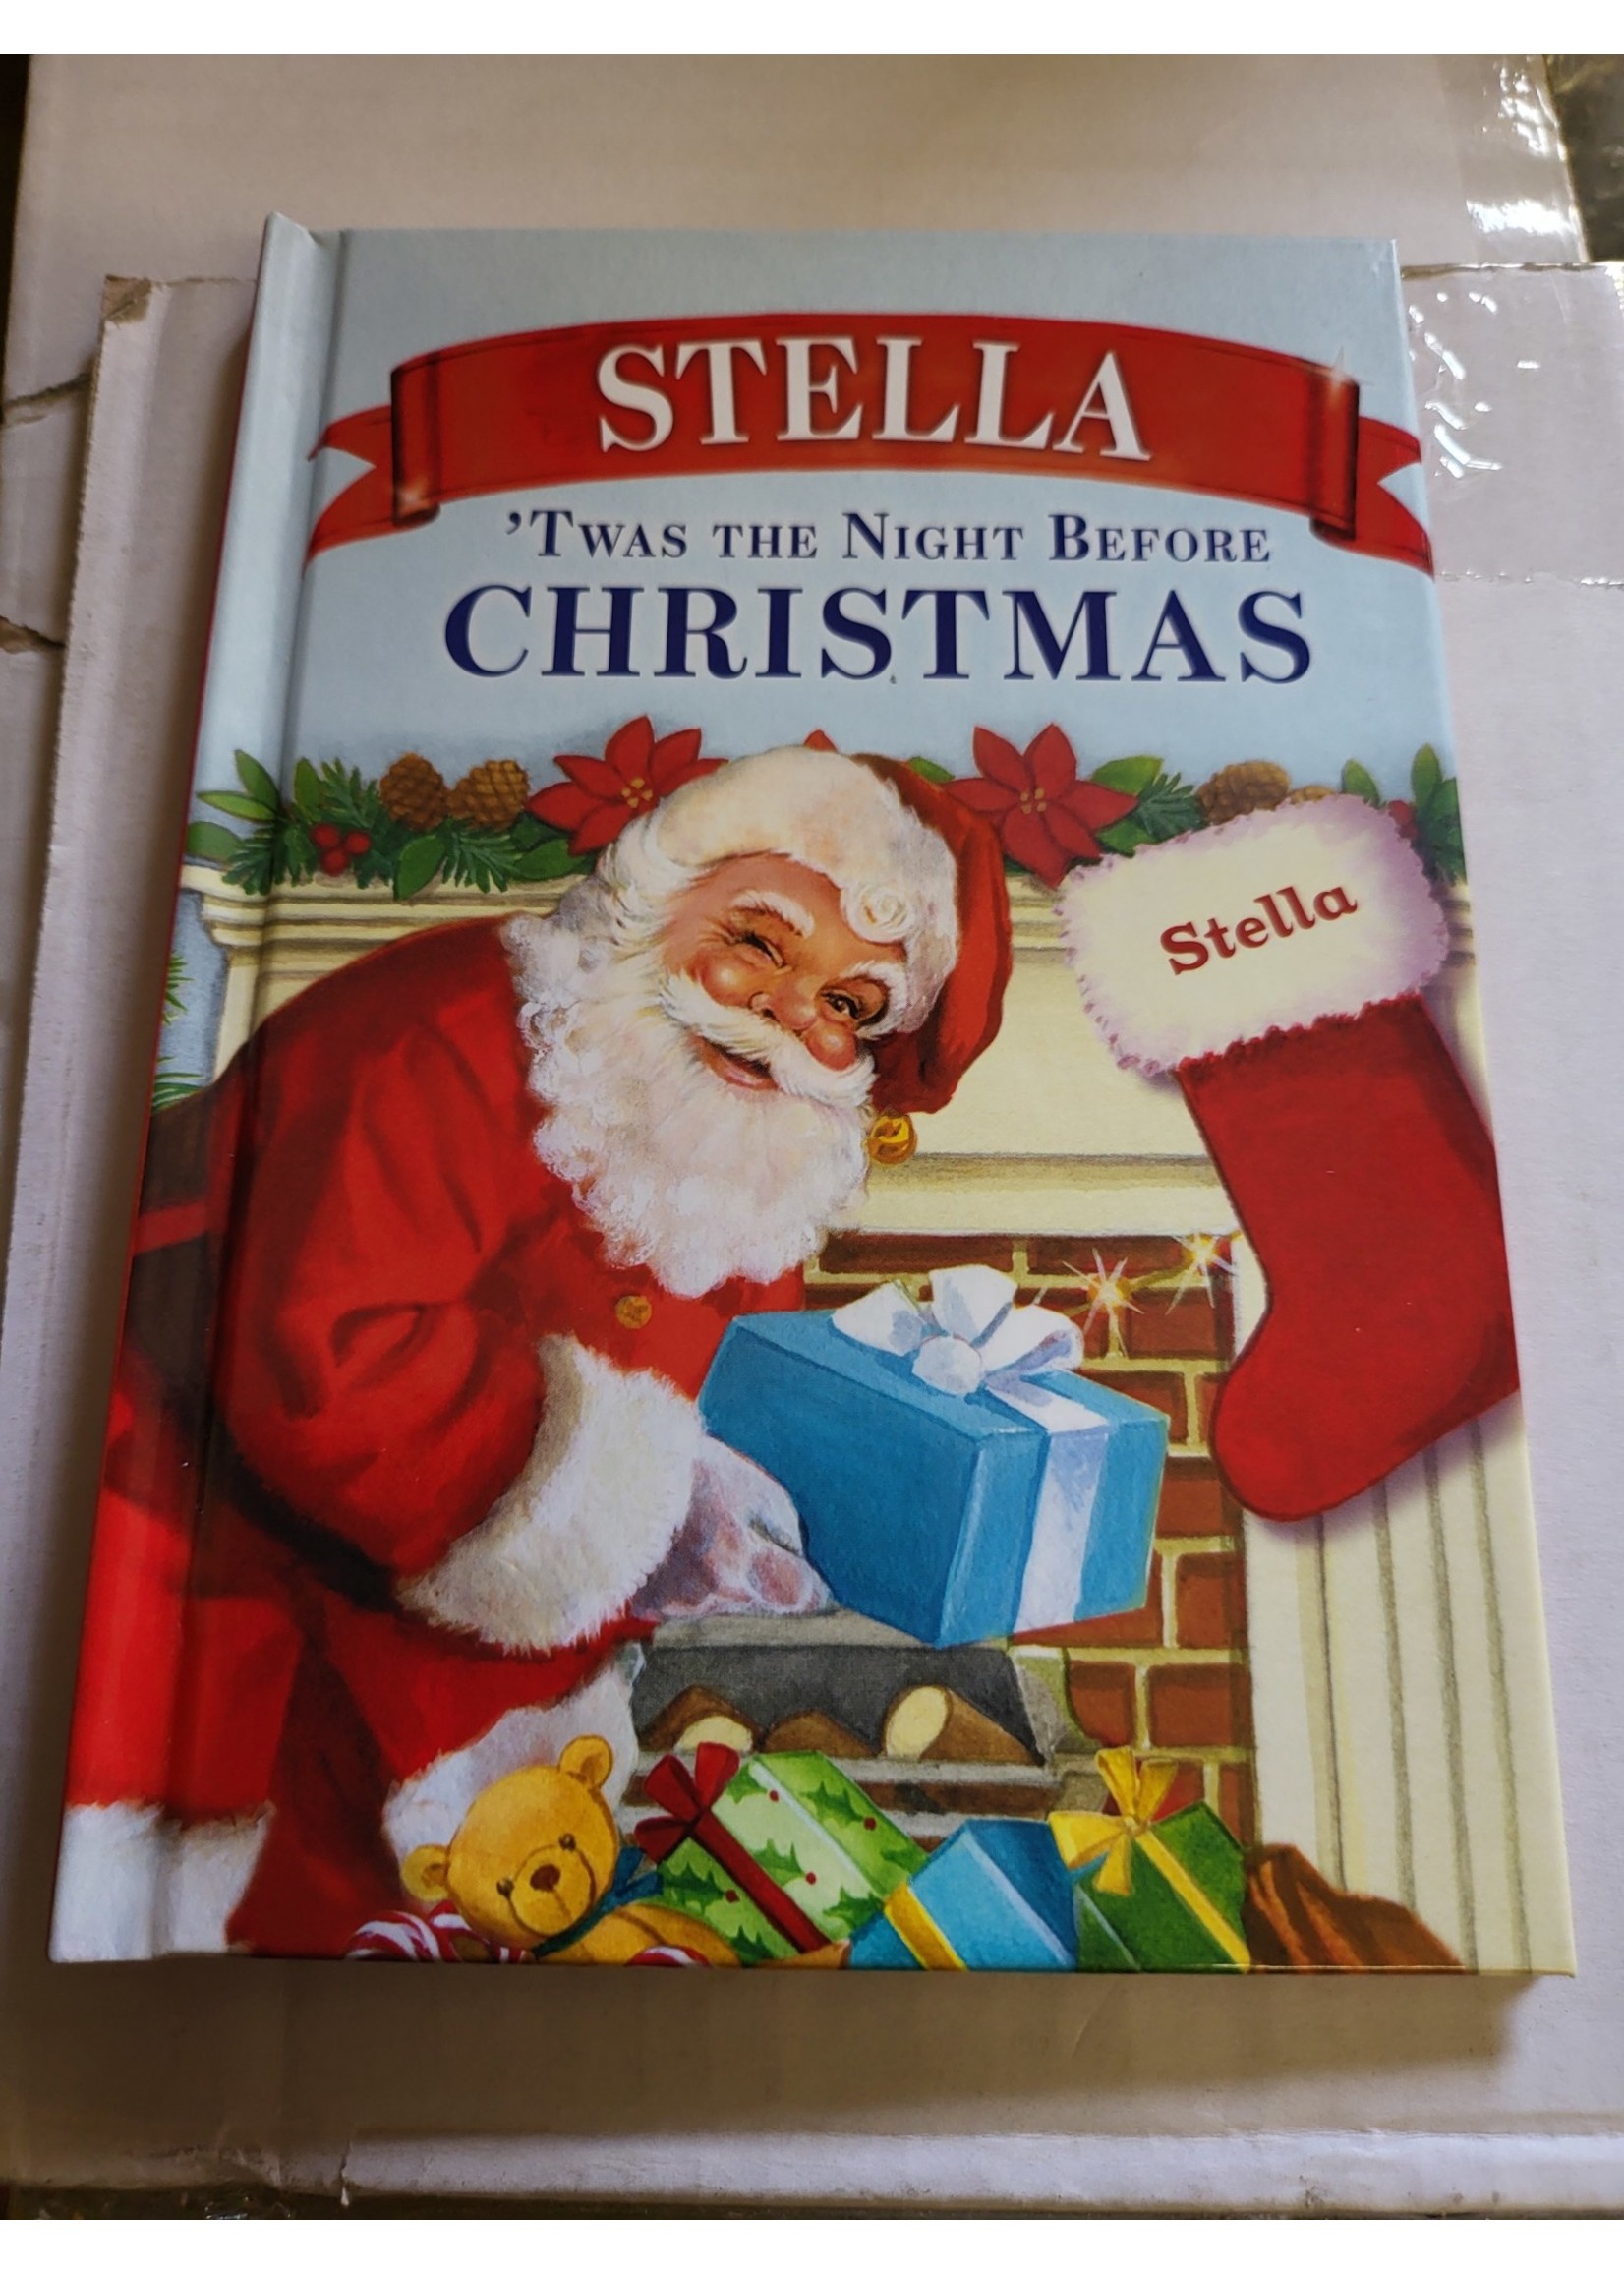 Stella - ‘Twas the Night Before Christmas Book